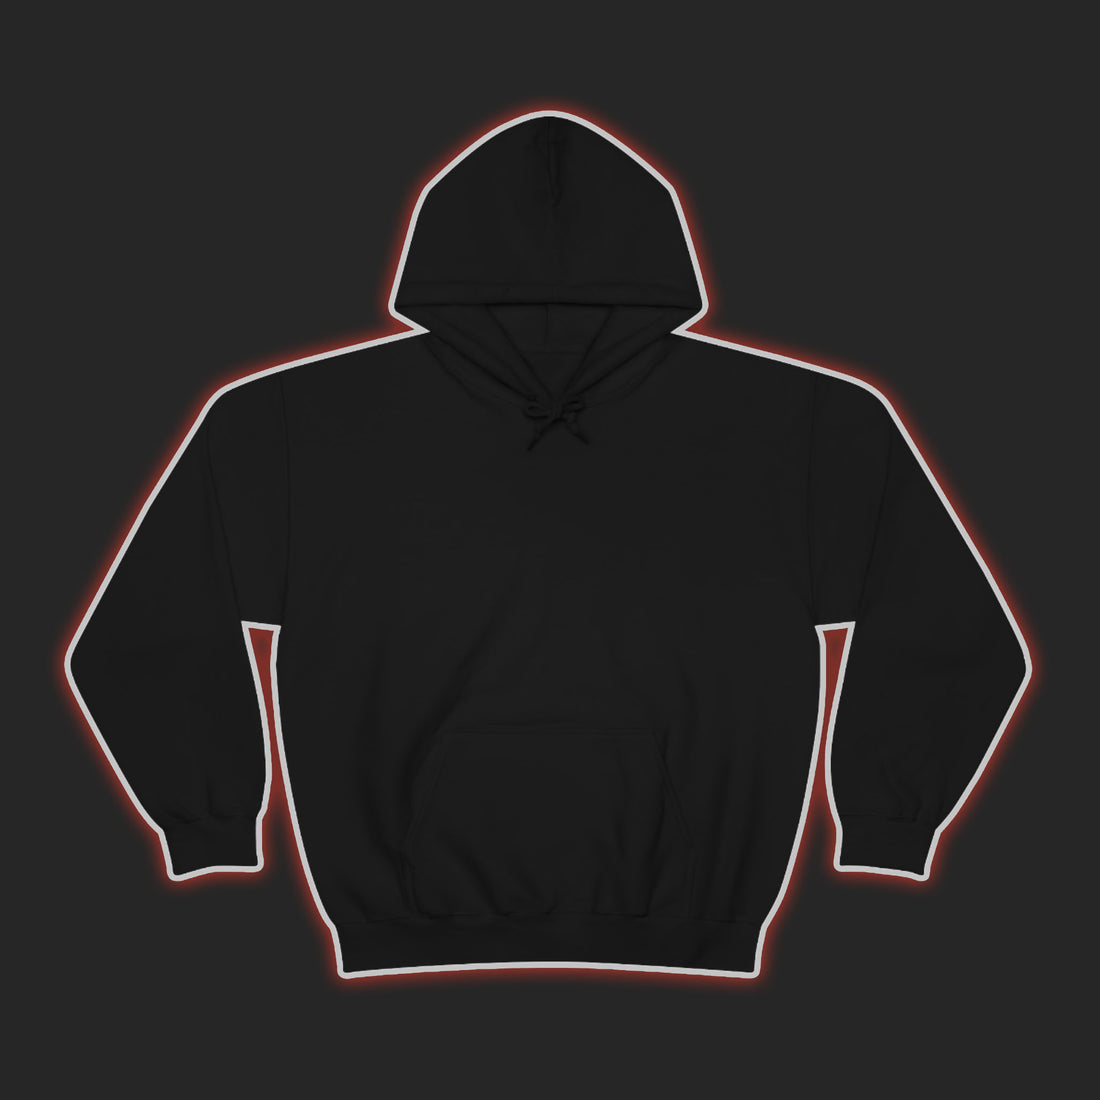 TKYSPORT Anime Hoodie design of Naruto, dark themed. Shot from the front.